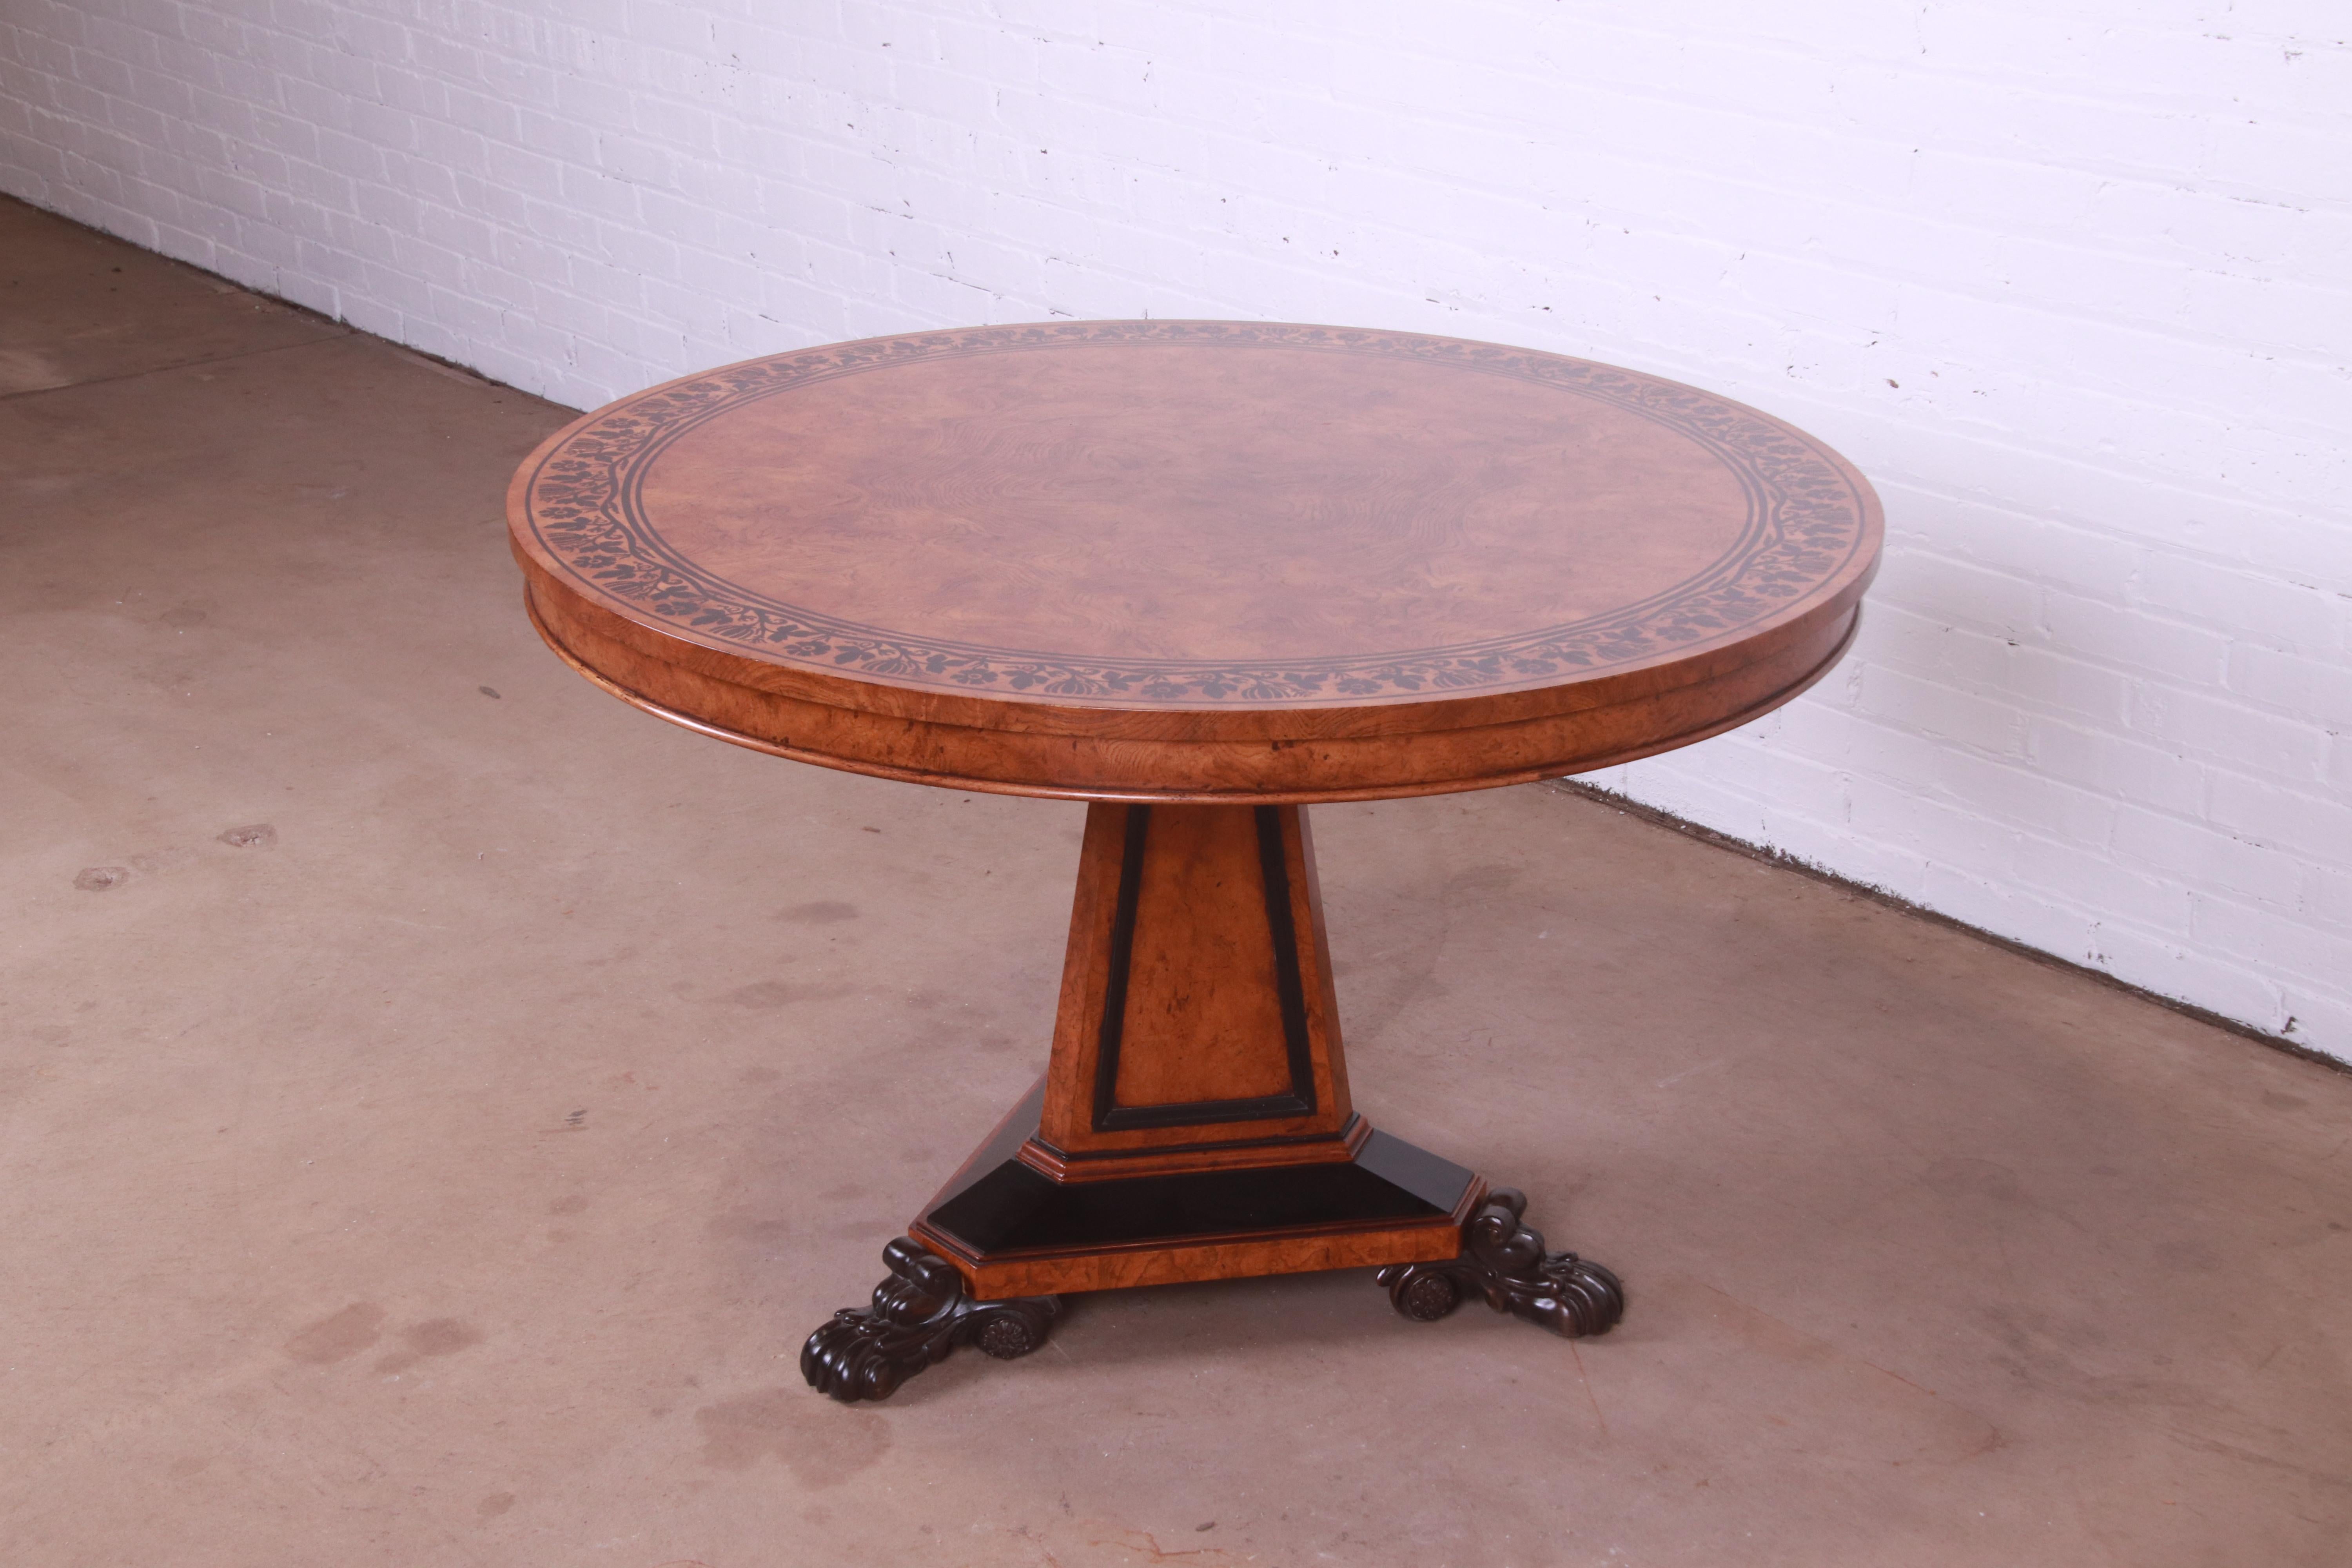 An outstanding Regency pedestal center table

From the exclusive 